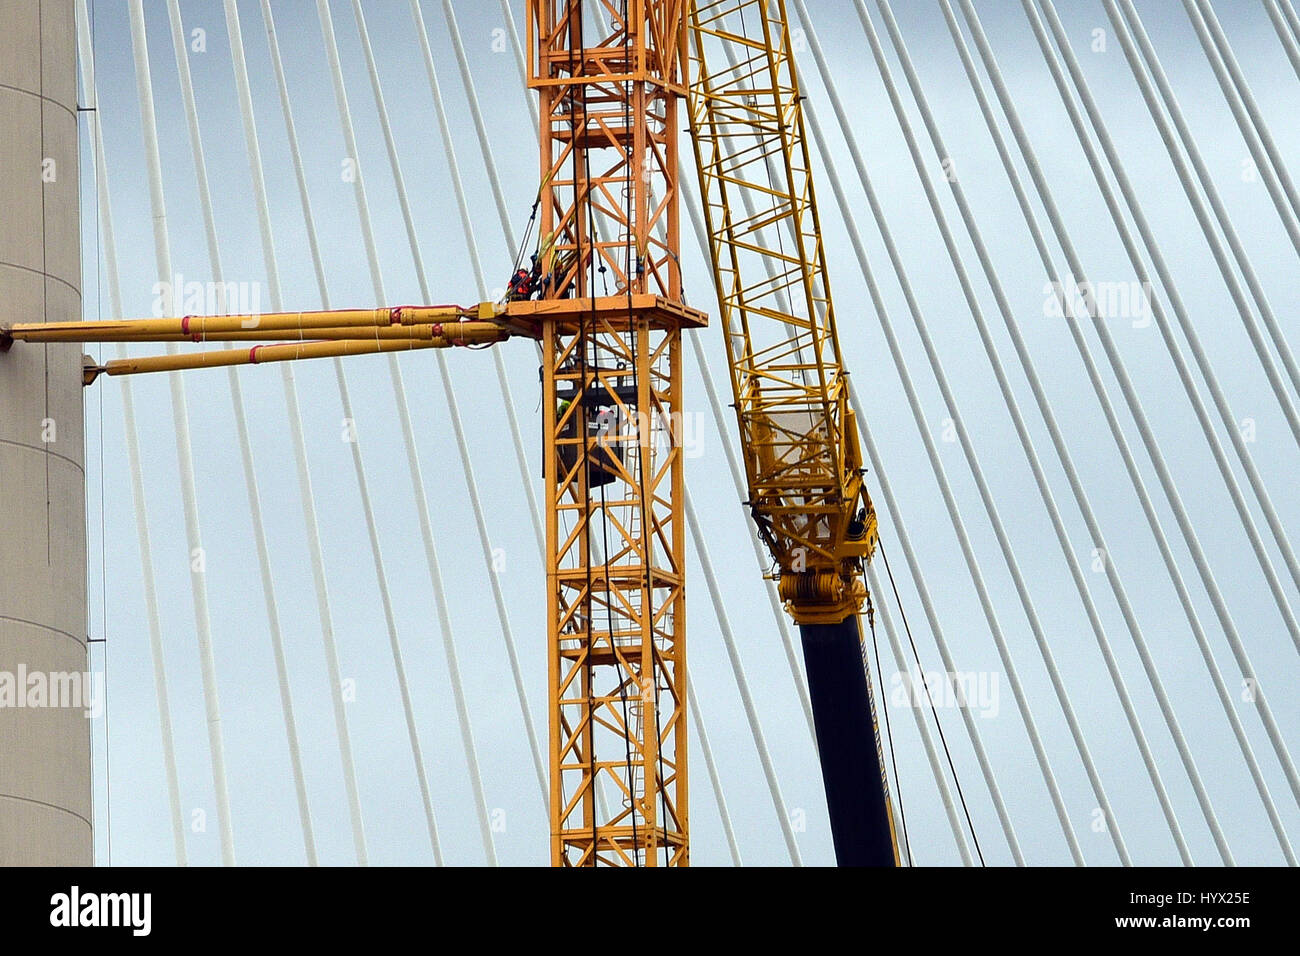 Edinburgh, Scotland, United Kingdom. 7th April, 2017. Intermittent progress continues on dismantling the construction cranes on the Queensferry Crossing which spans the Forth Estuary near Edinburgh. High winds through the winter have disrupted progress on the work, which has been a factor in the delay in the planned opening of the bridge until August 2017. Credit: Ken Jack/Alamy Live News Stock Photo